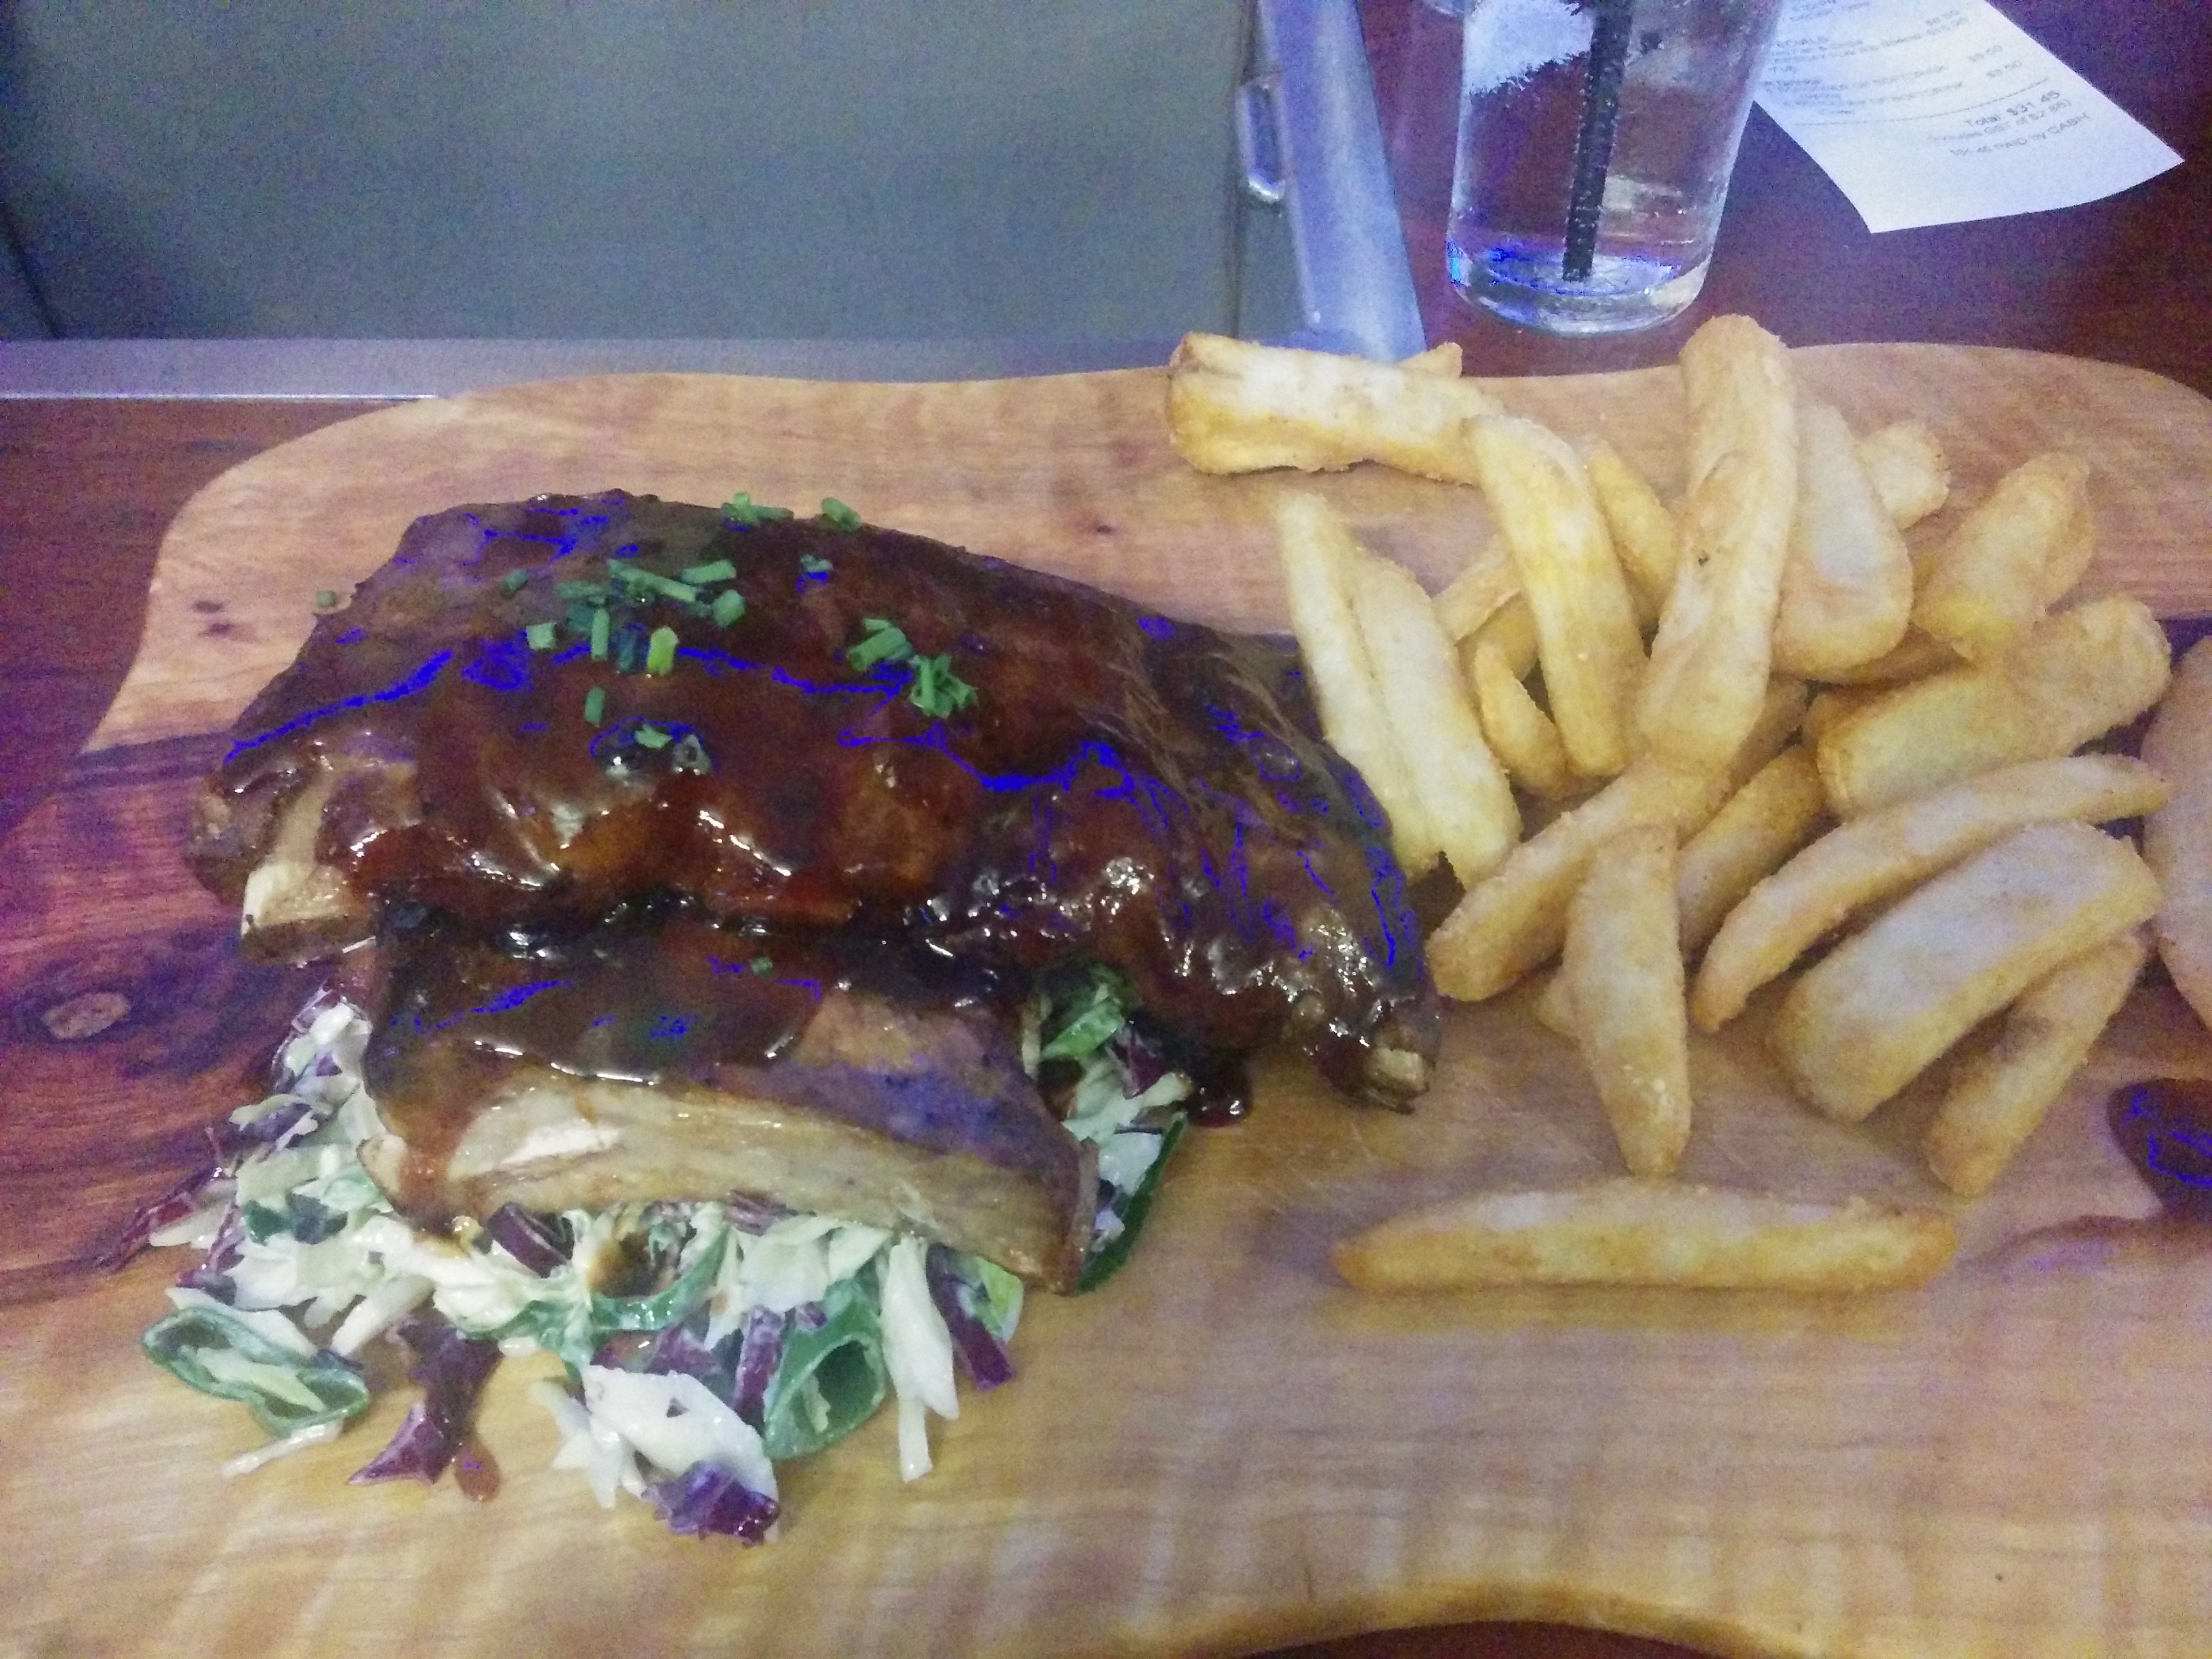 Ribs and fries